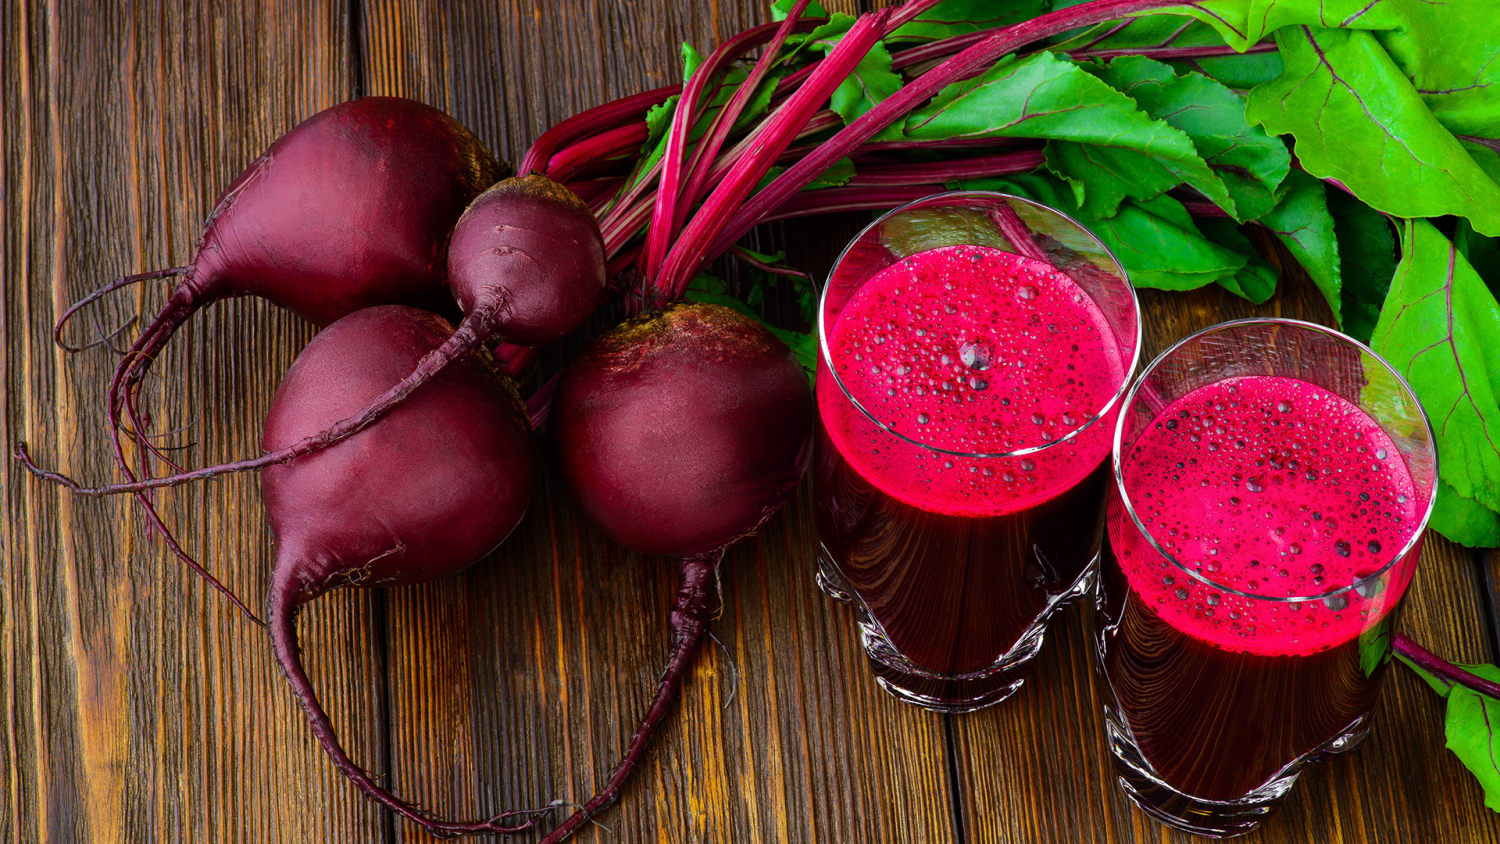 Beetroot - Benefits, Nutritional Facts, & Beets Recipes - Blog - HealthifyMe